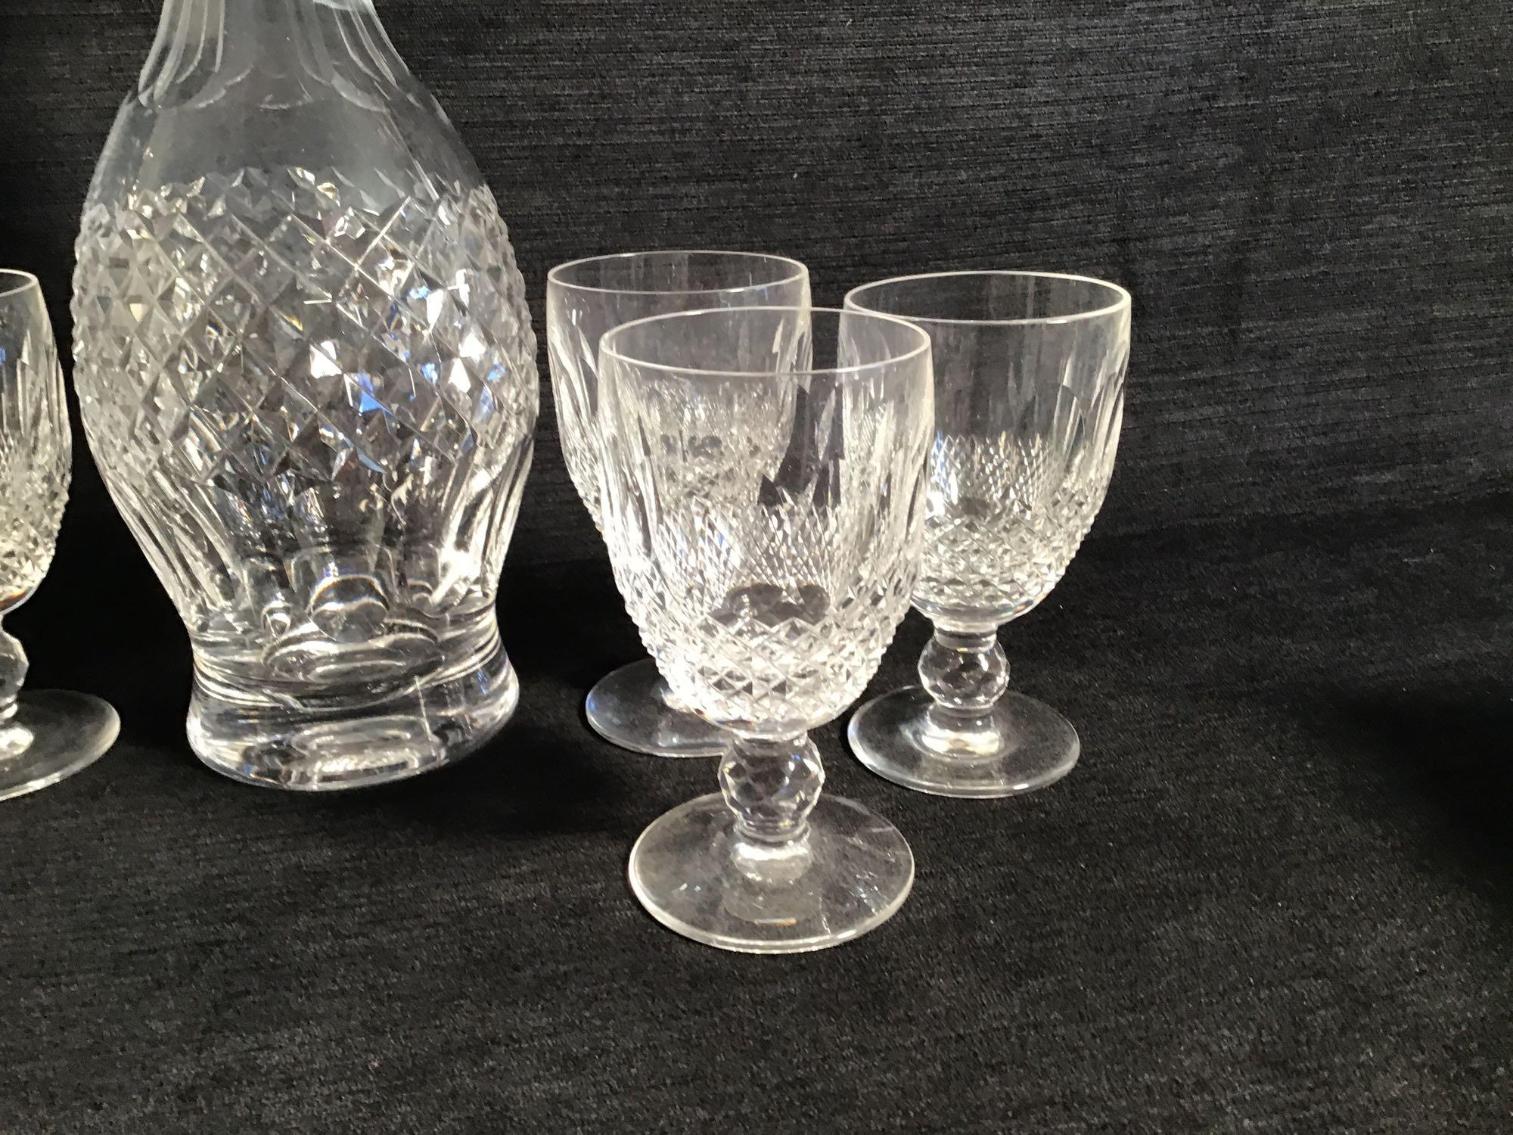 Image for Waterford “Colleen” Decanter and & stems